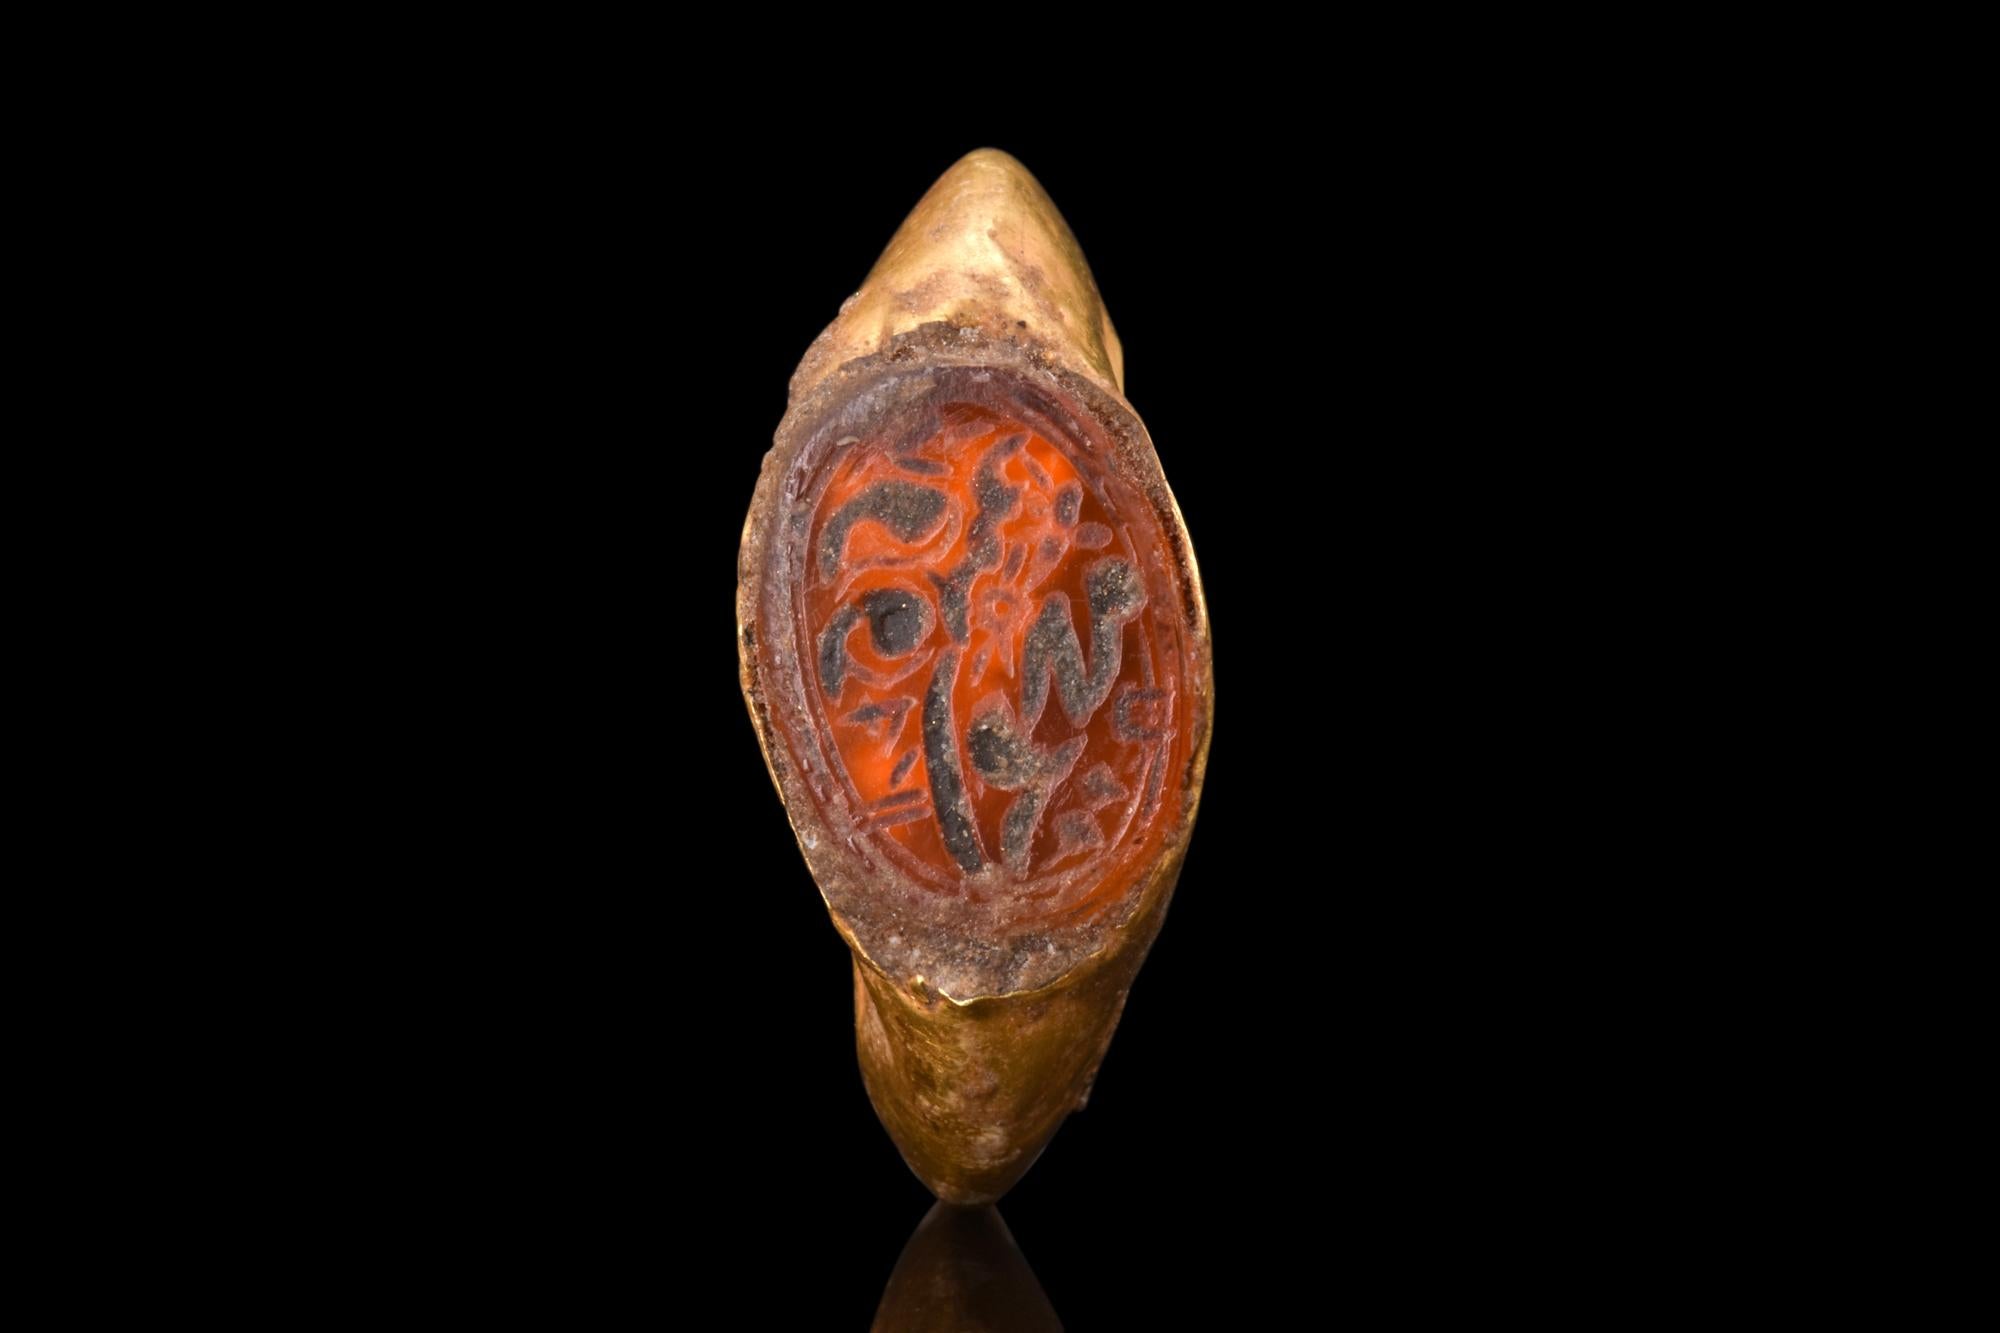 A Sasanian gold ring adorned with a carnelian intaglio featuring masterful calligraphy. The carnelian intaglio in this particular ring is a testament to the mastery of early Islamic calligraphy, with its delicate curves and graceful lines forming a